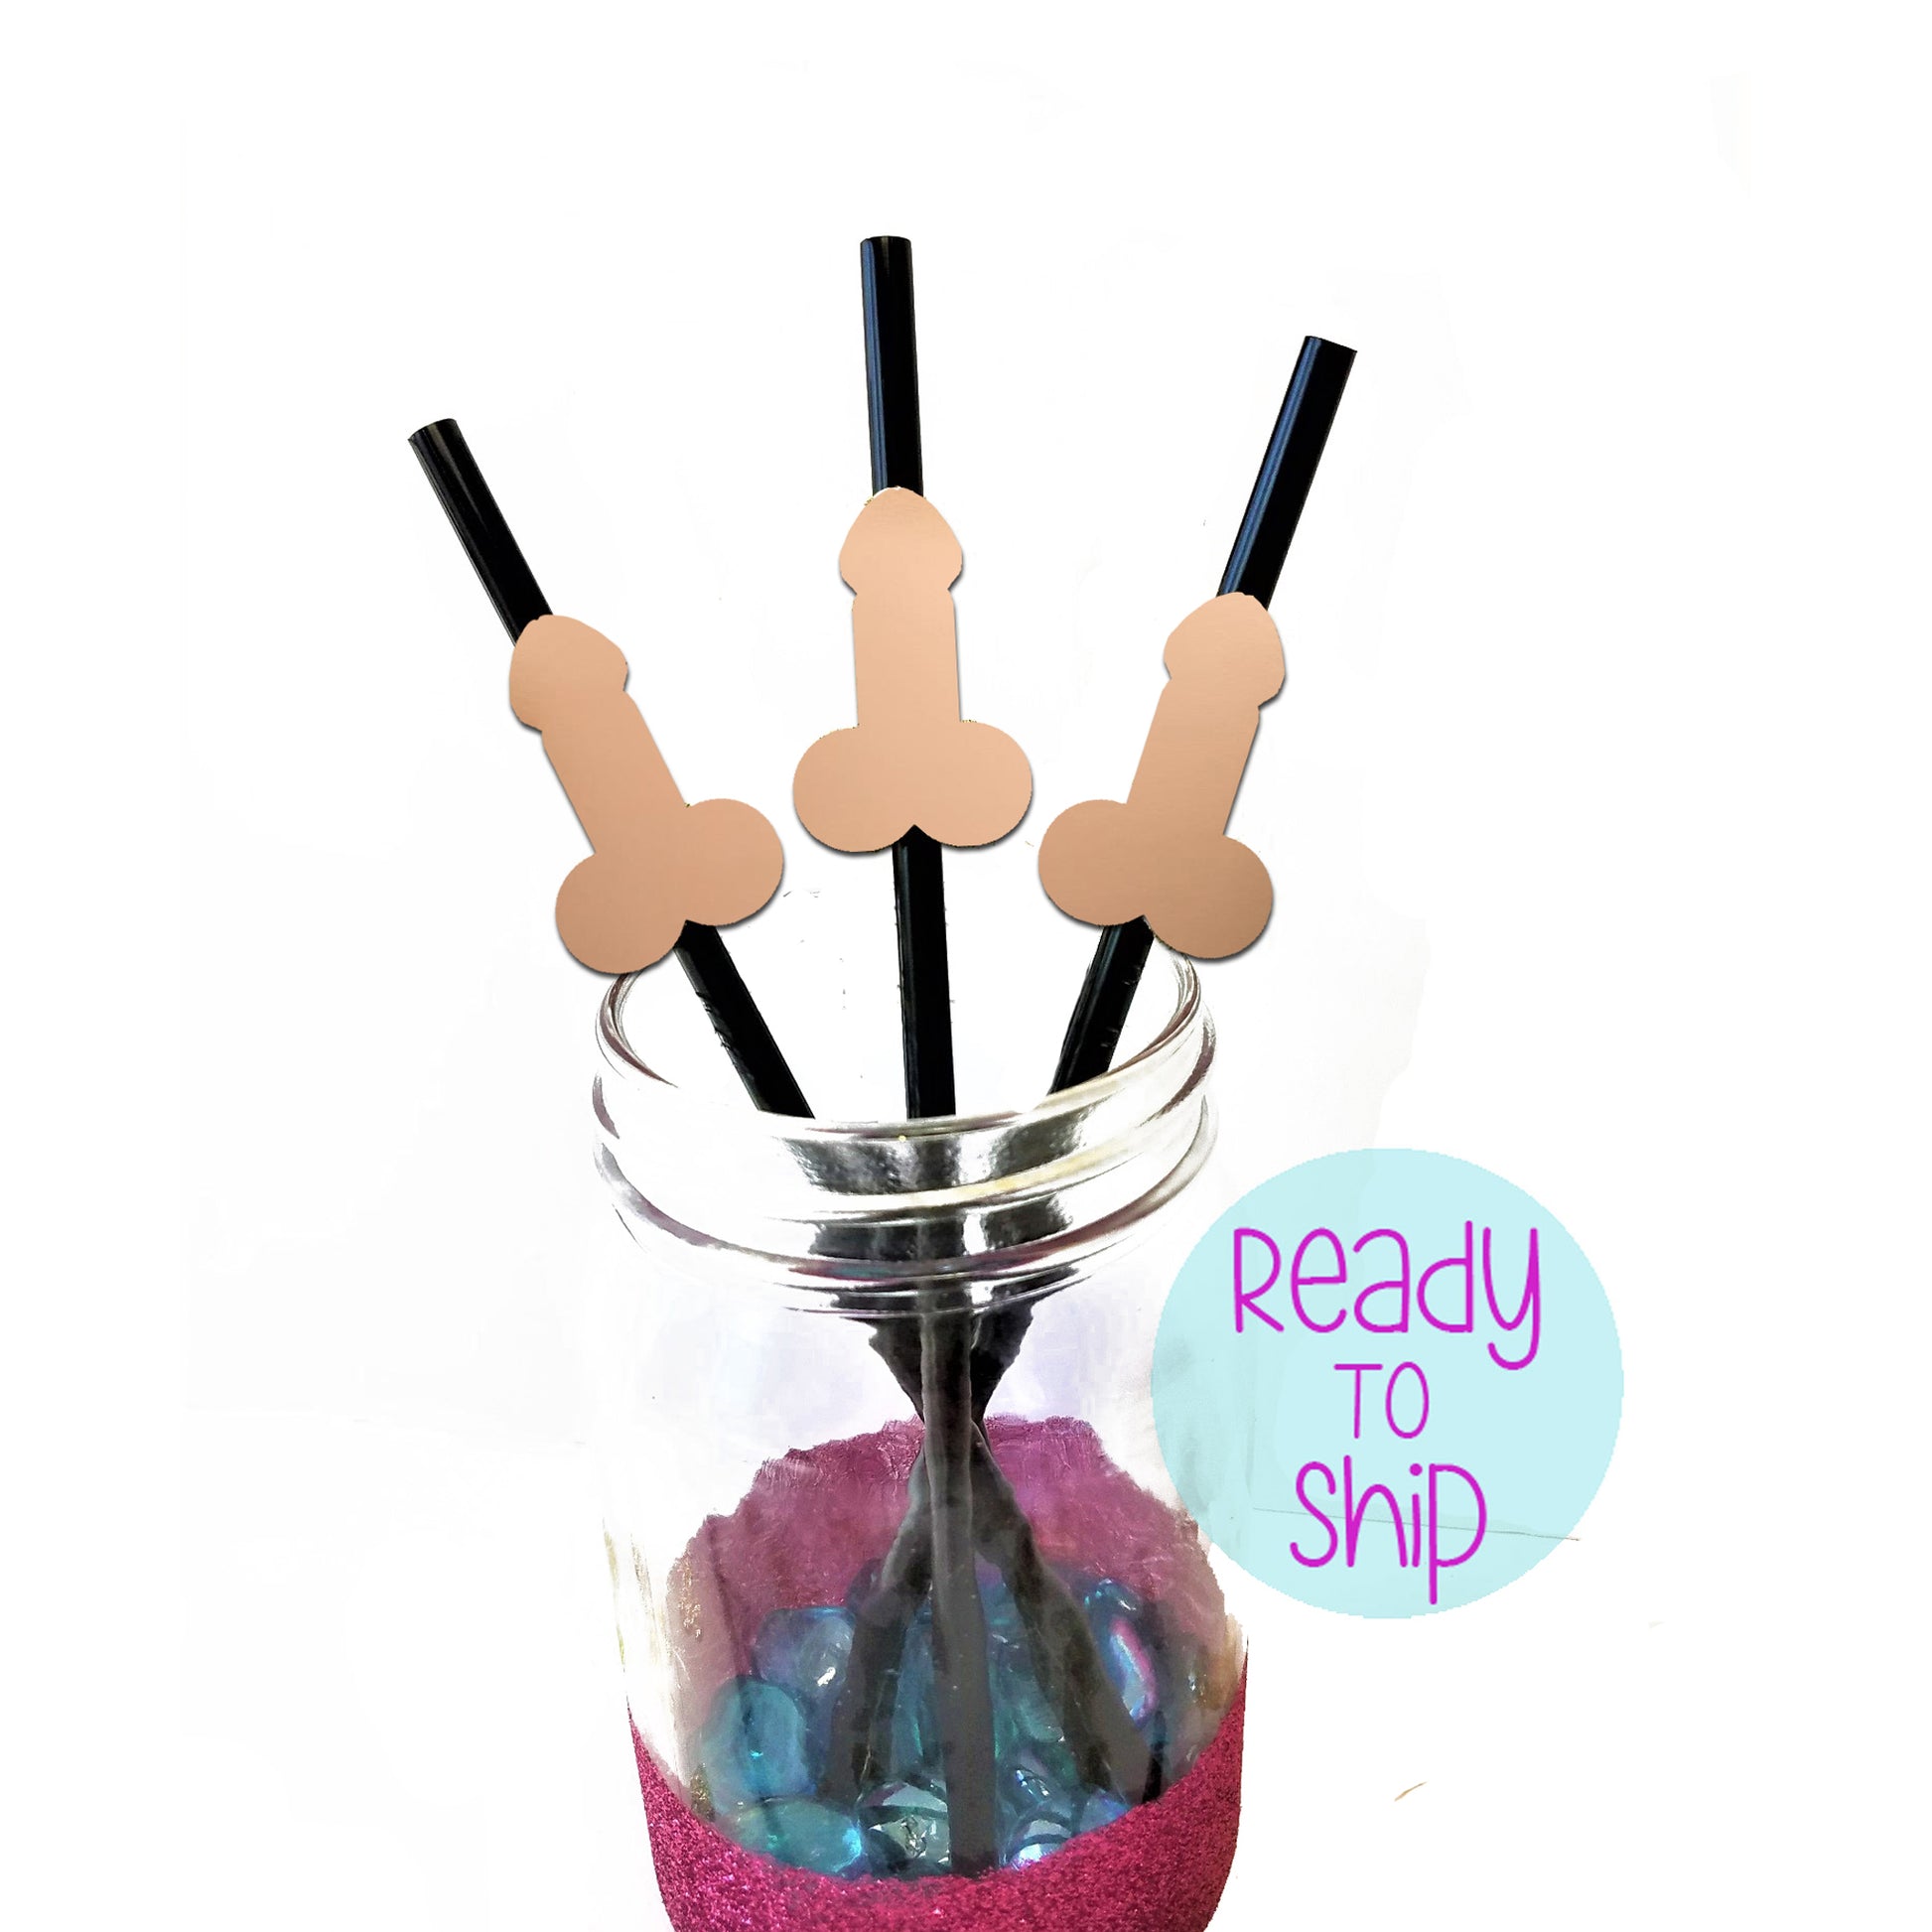 Bachelorette Party Penis Straw - 10 Pack